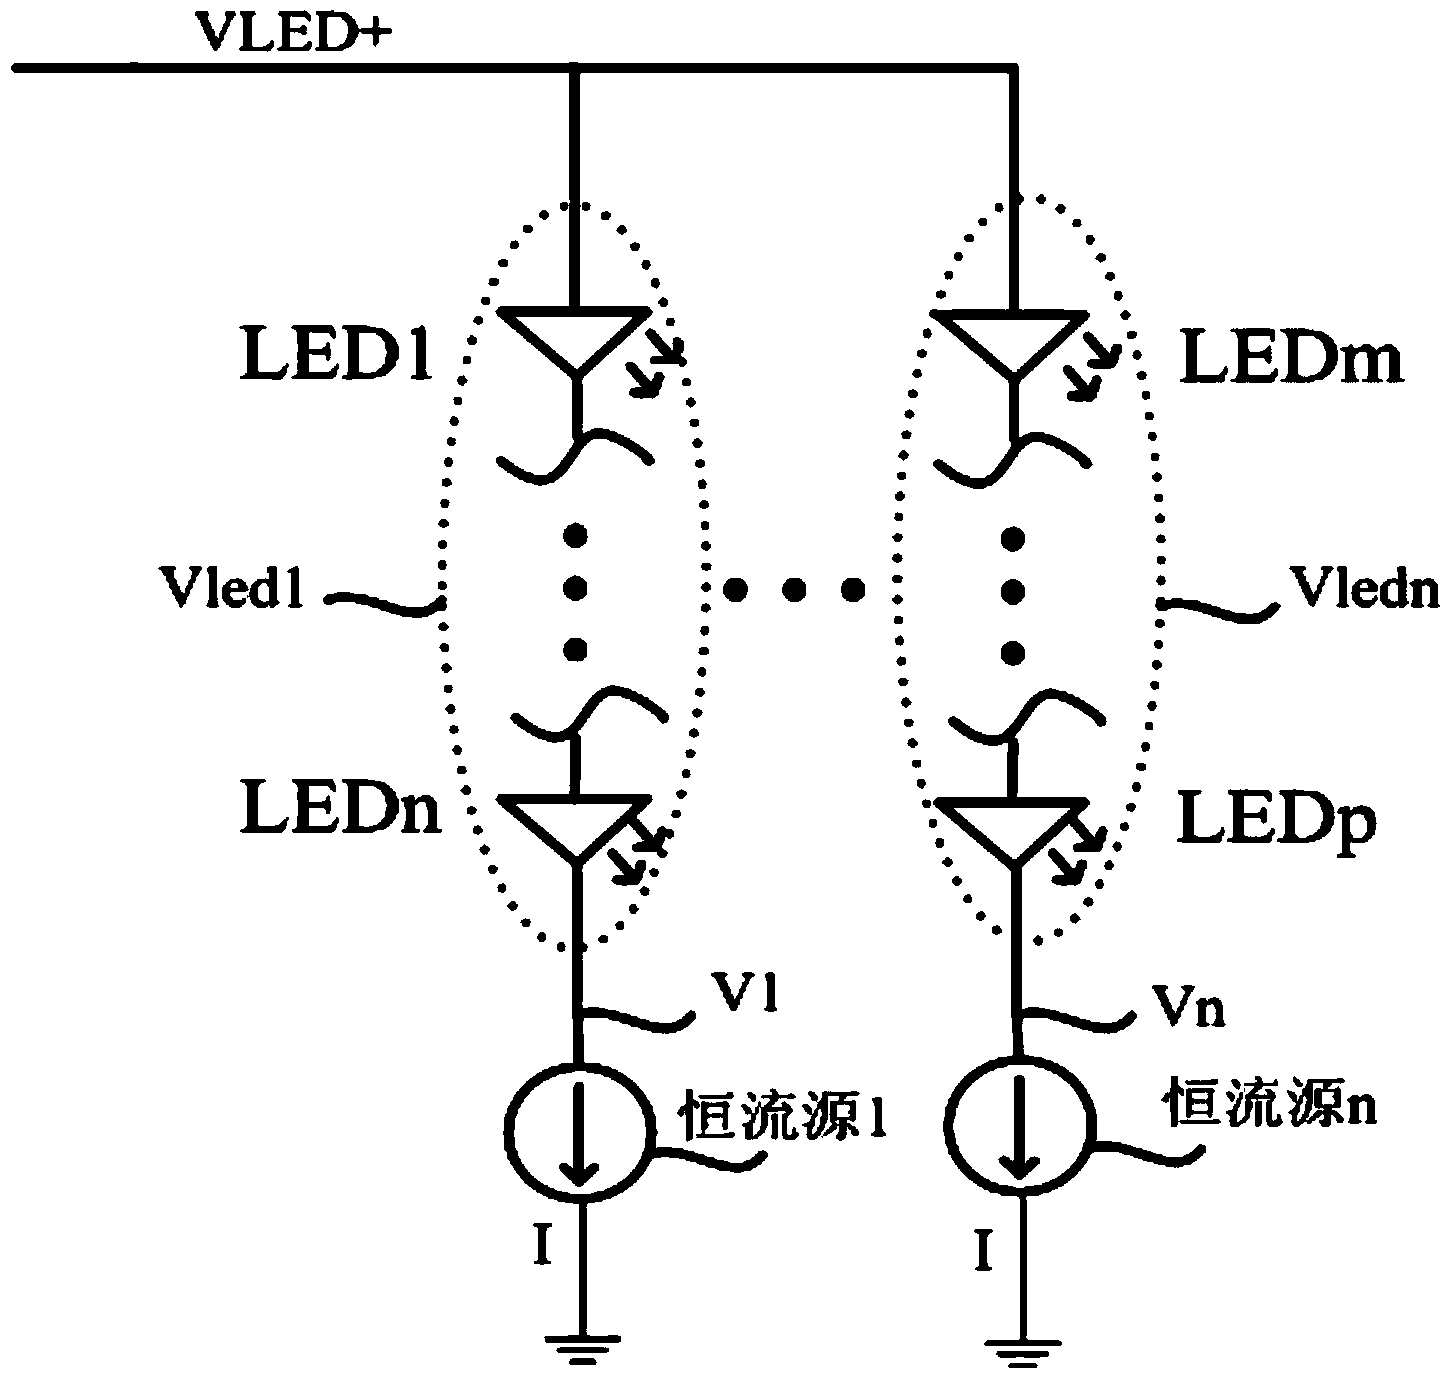 Device for measuring voltage difference between LED string lights